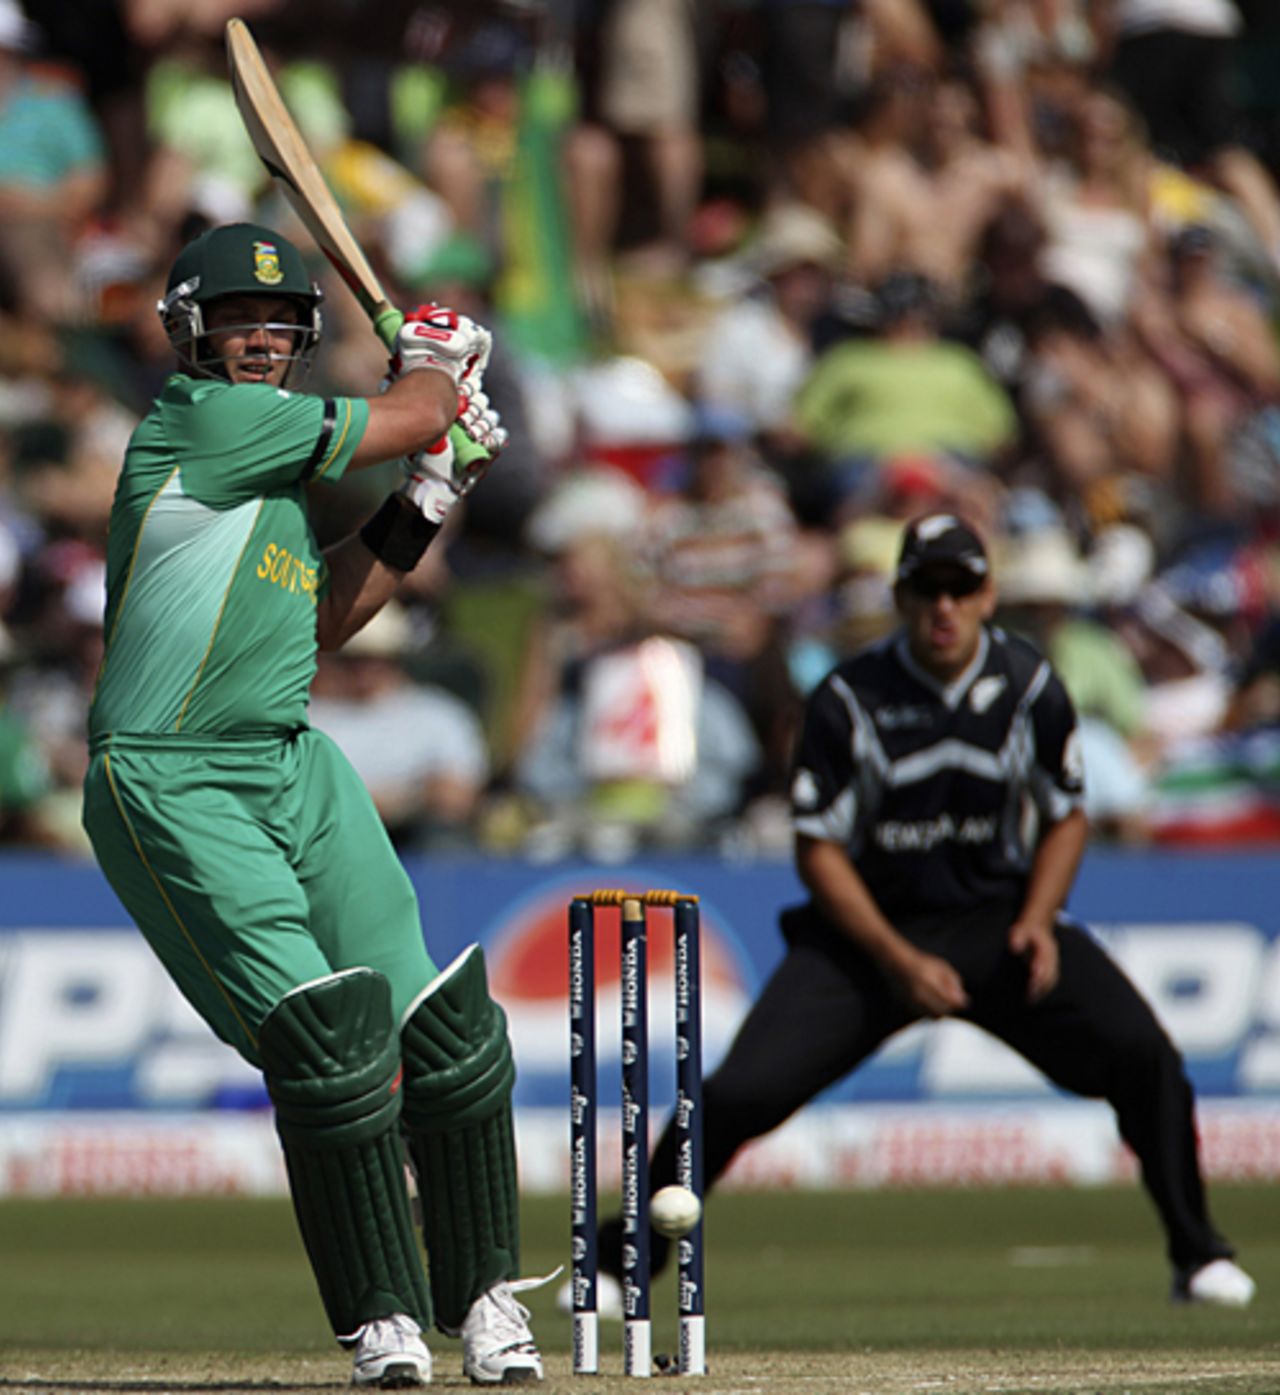 Jacques Kallis gets it past midwicket, South Africa v New Zealand, Champions Trophy, Group B, Centurion, September 24, 2009